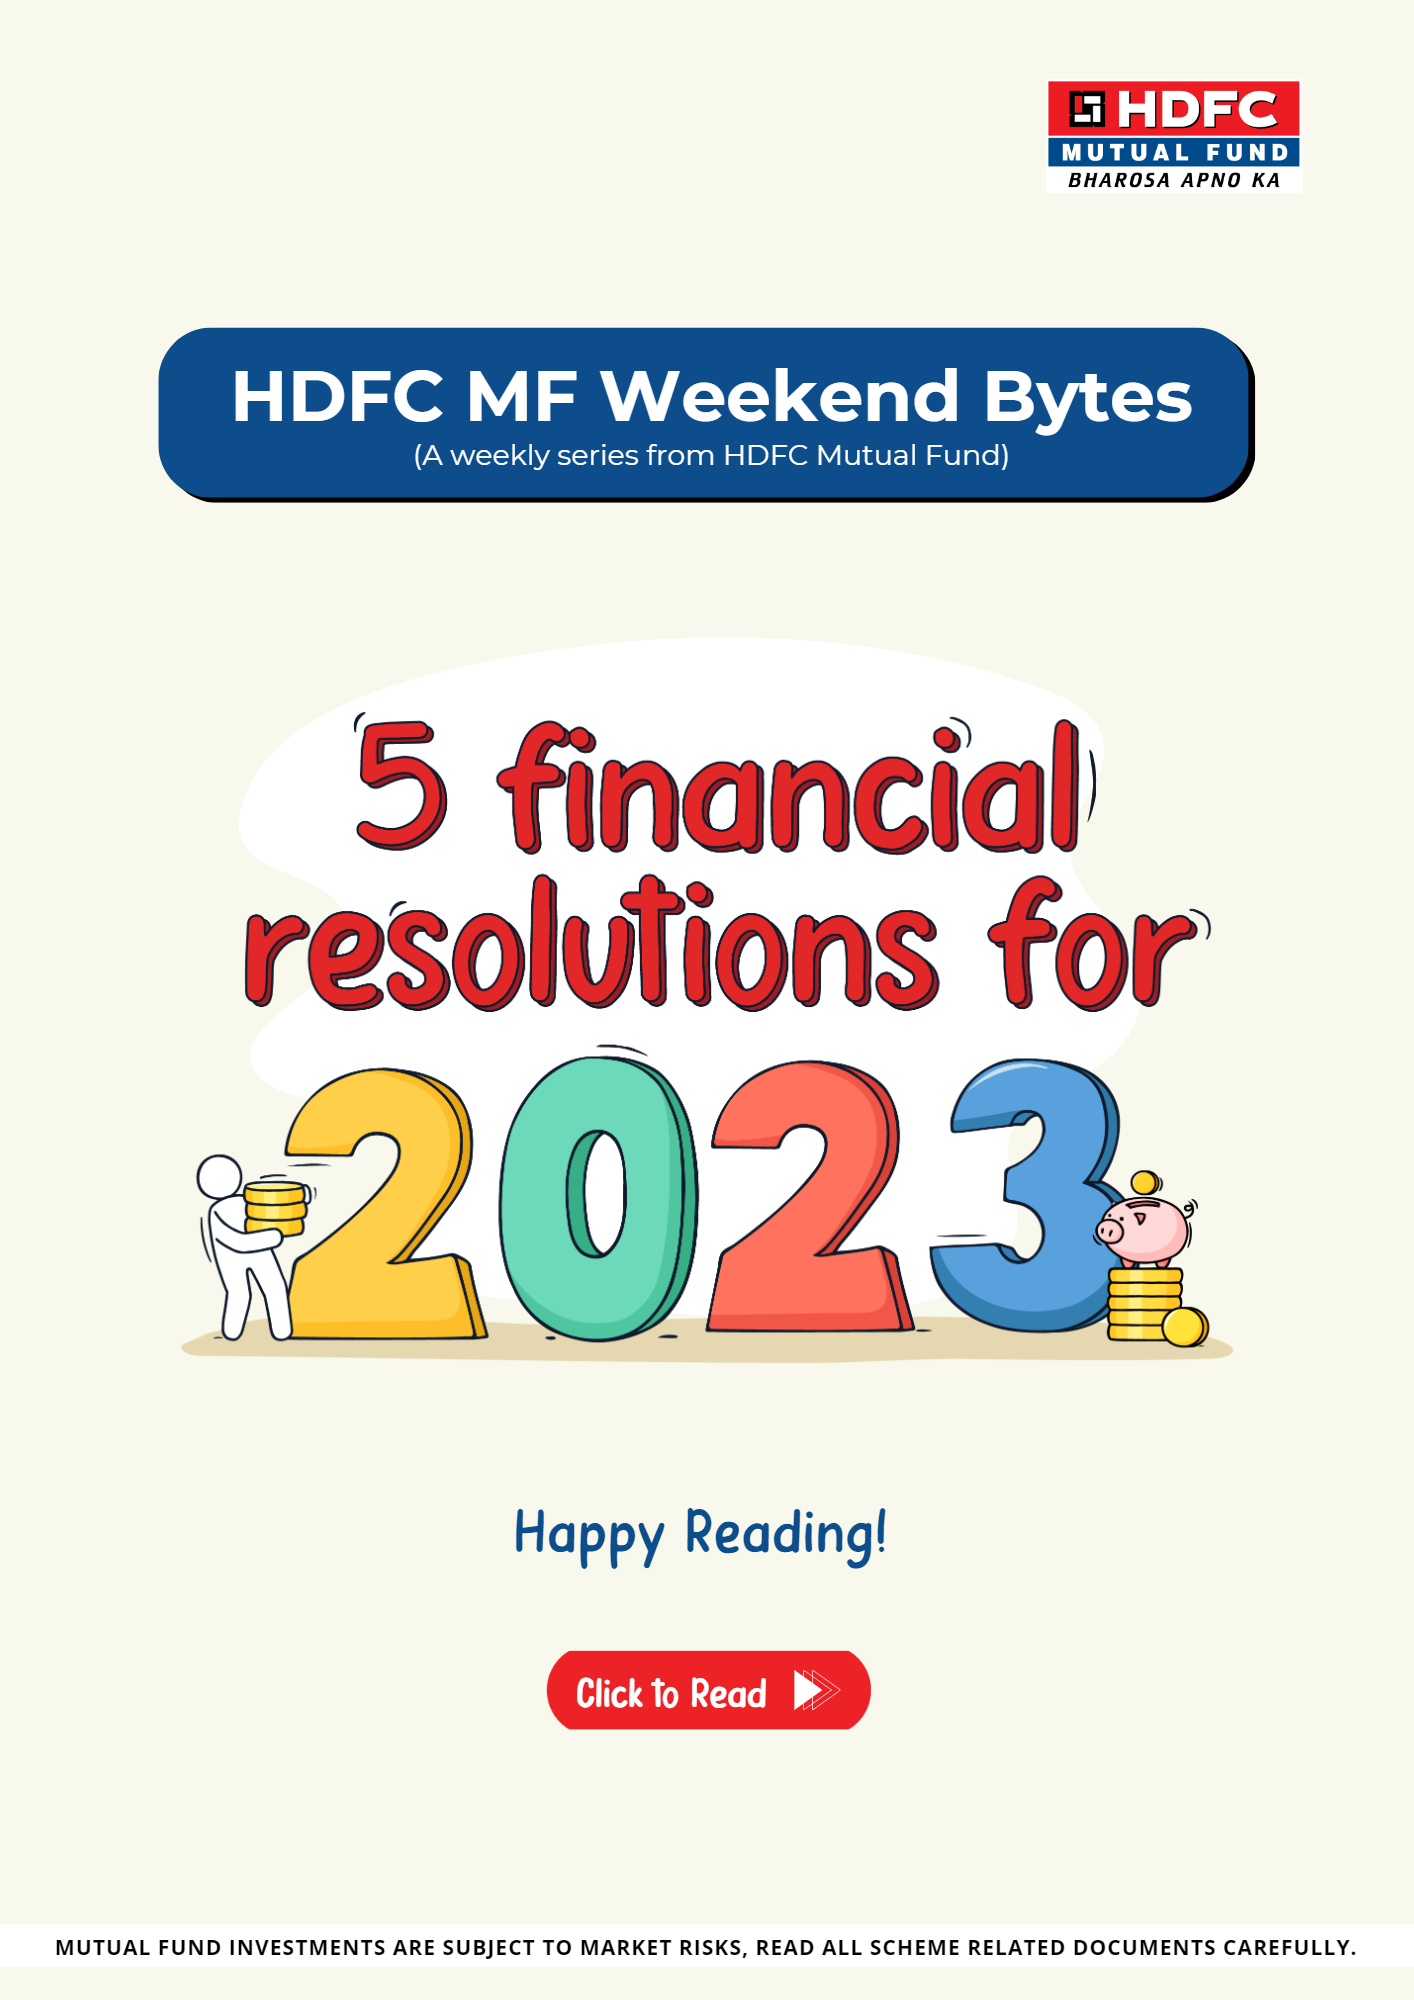 5 financial resolutions for 2023